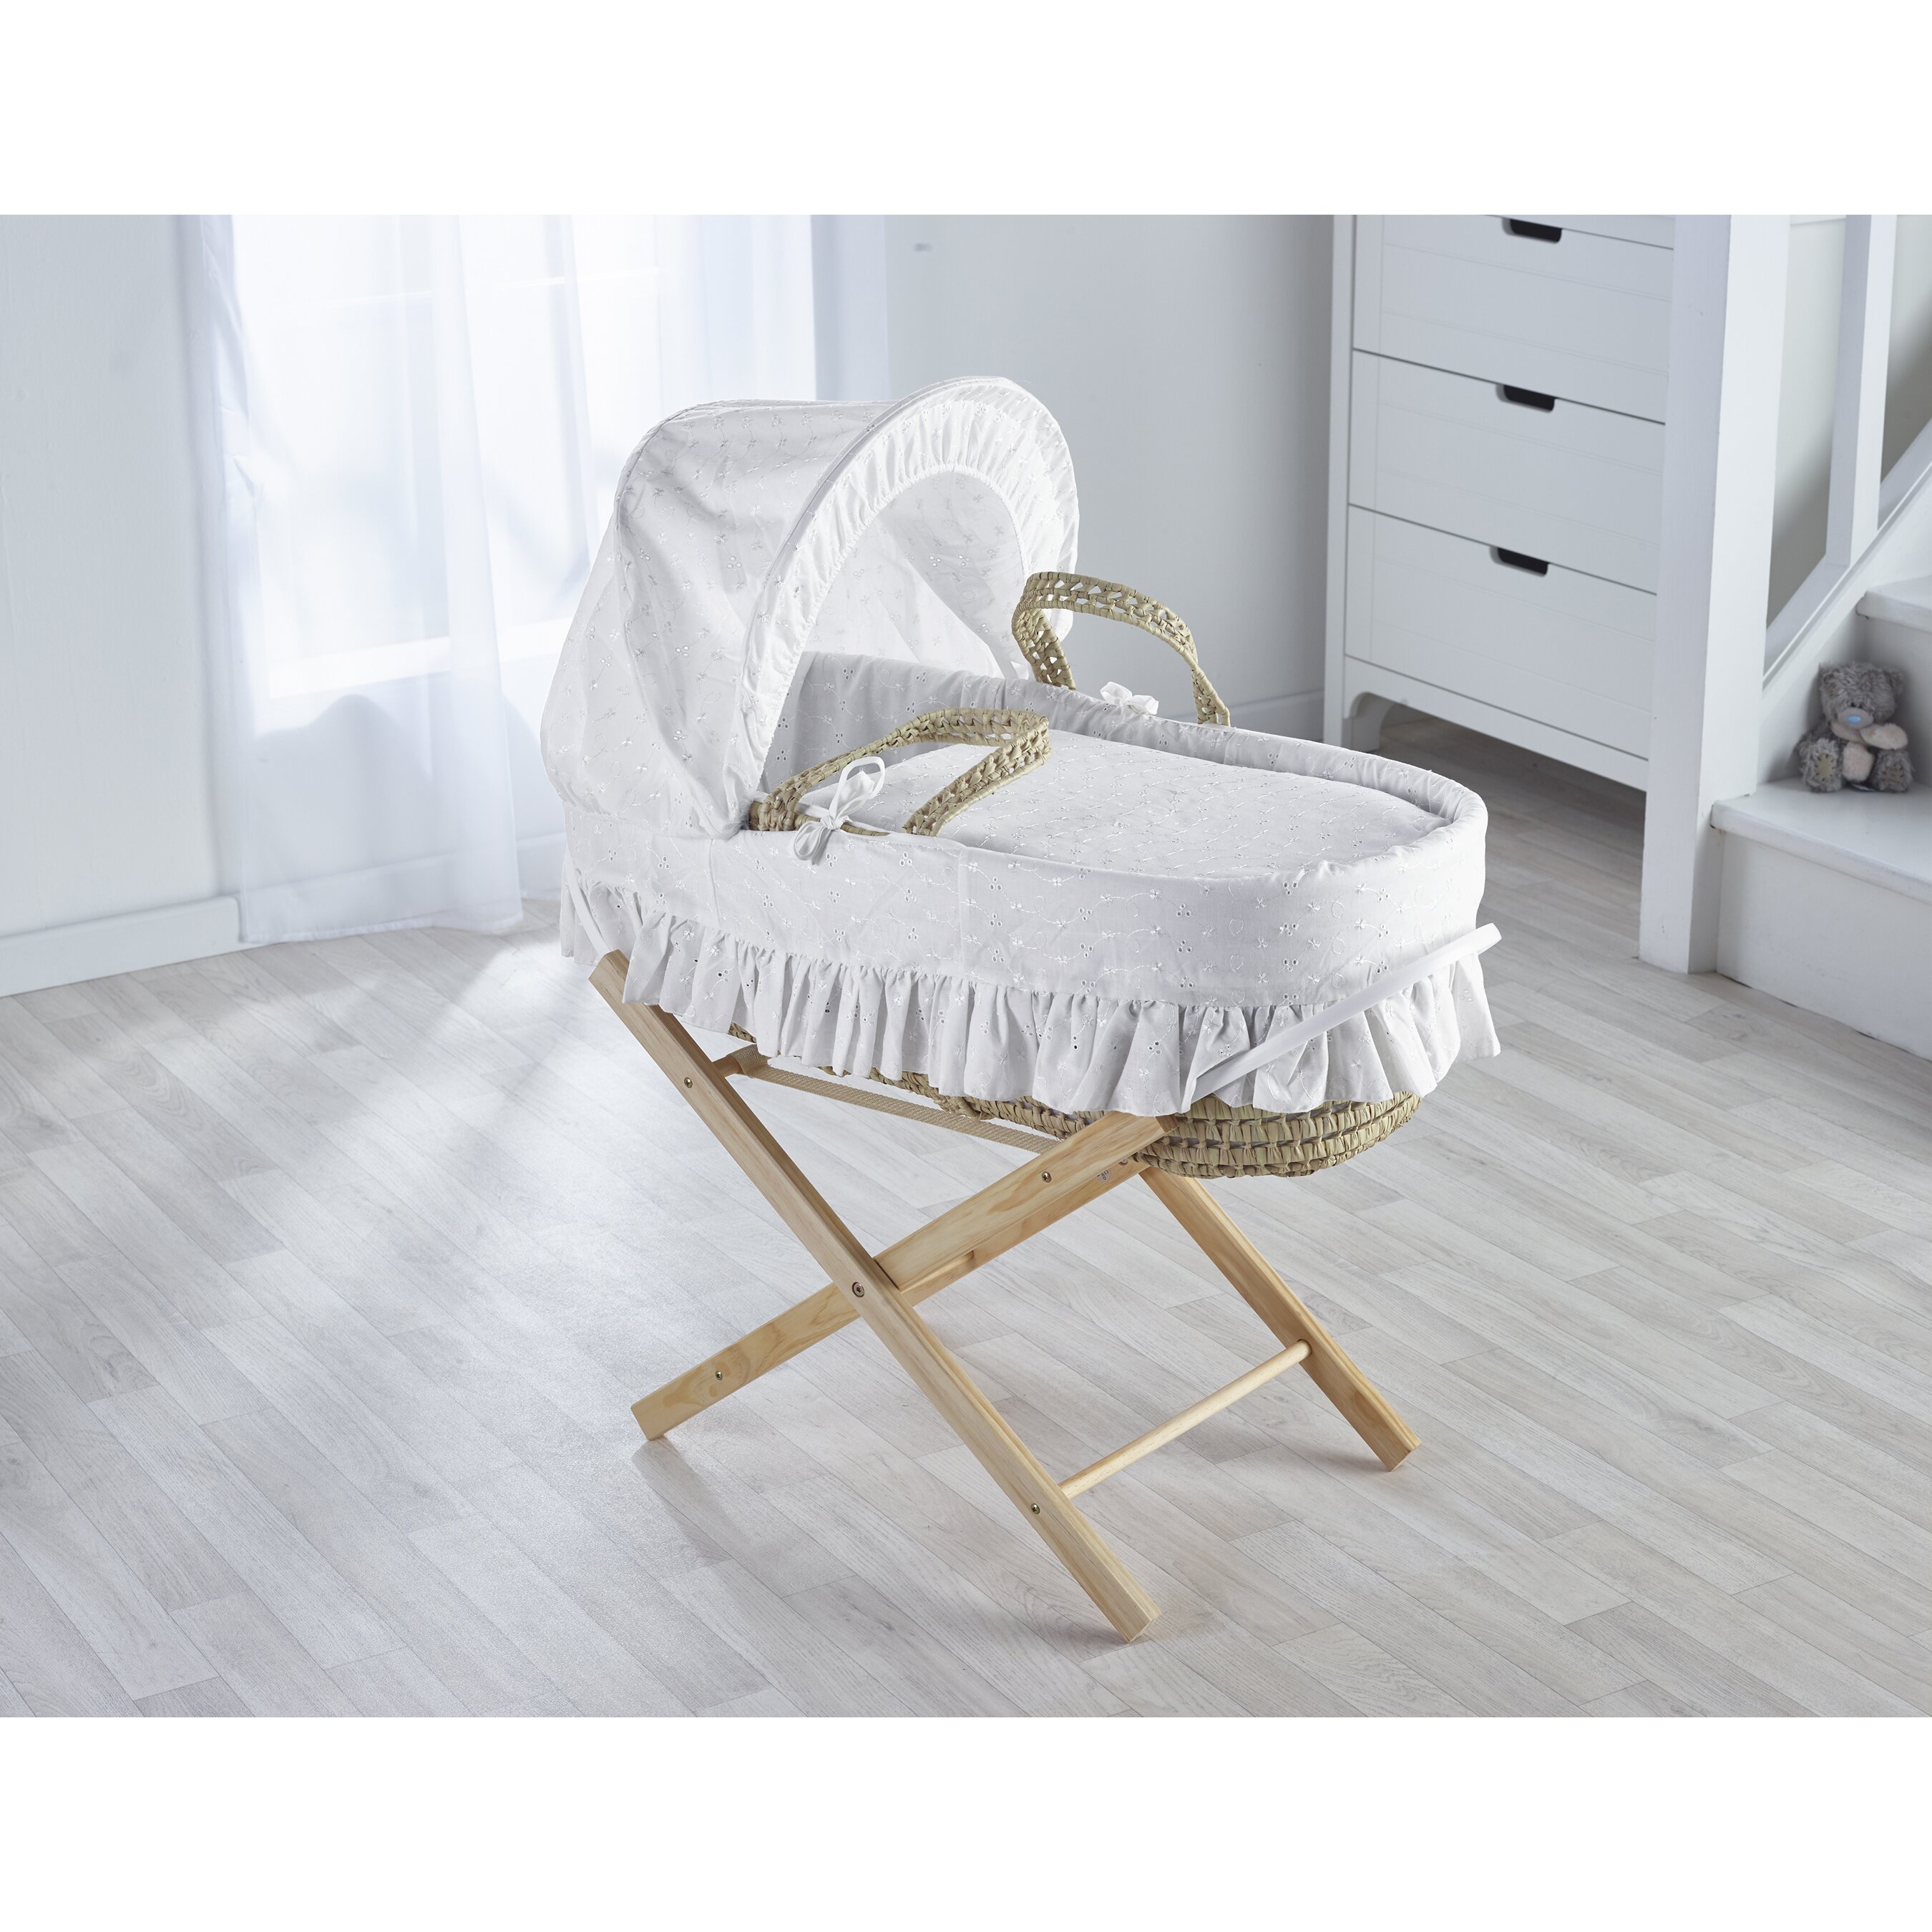 White Broderie Anglaise Palm Moses Basket with Folding Stand - Opal Natural